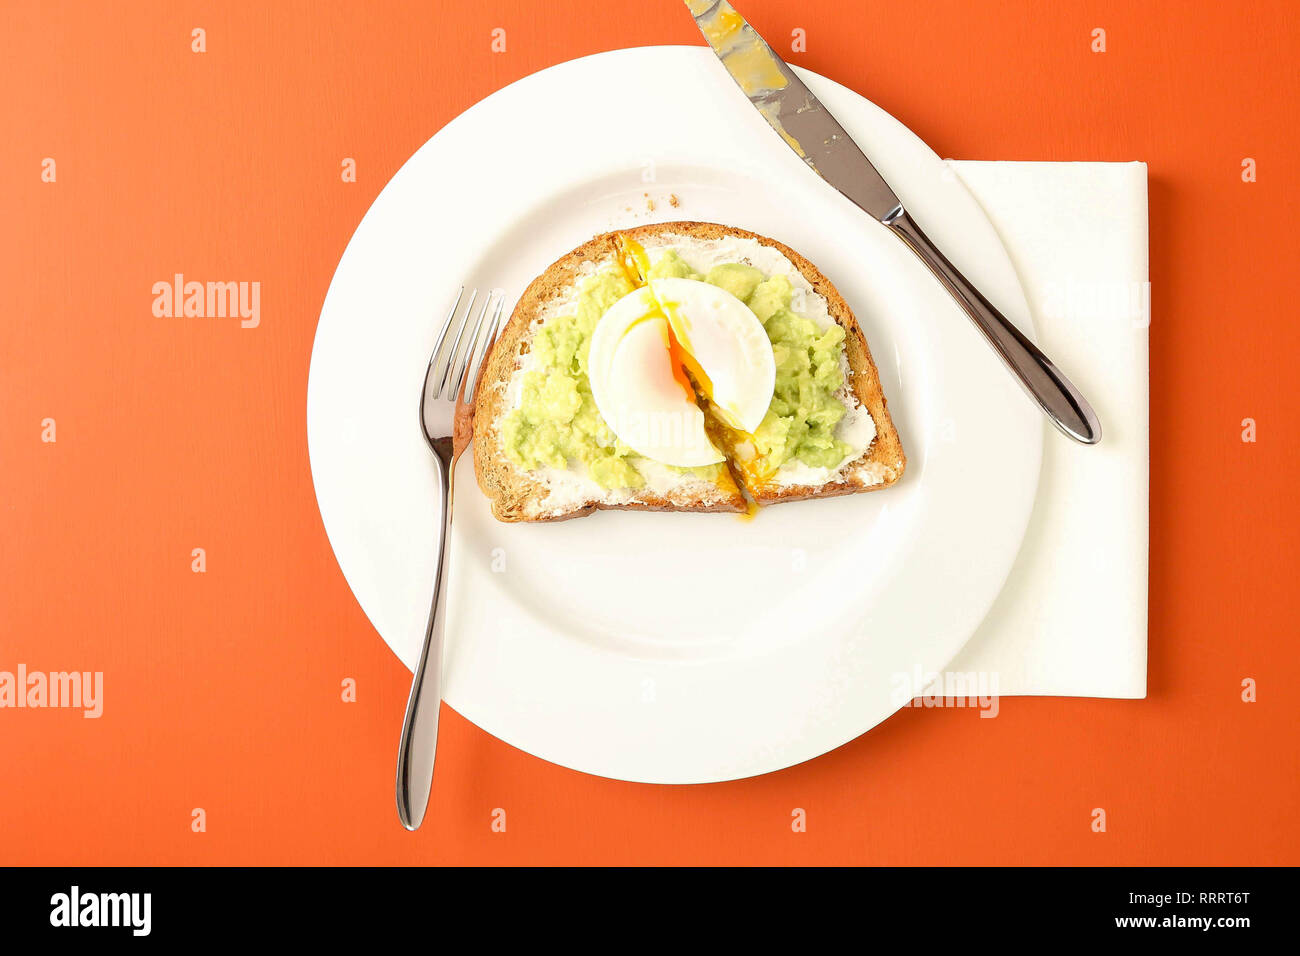 Eating avocado on toast with poached egg at a cafe.  Living coral colour table. Stock Photo